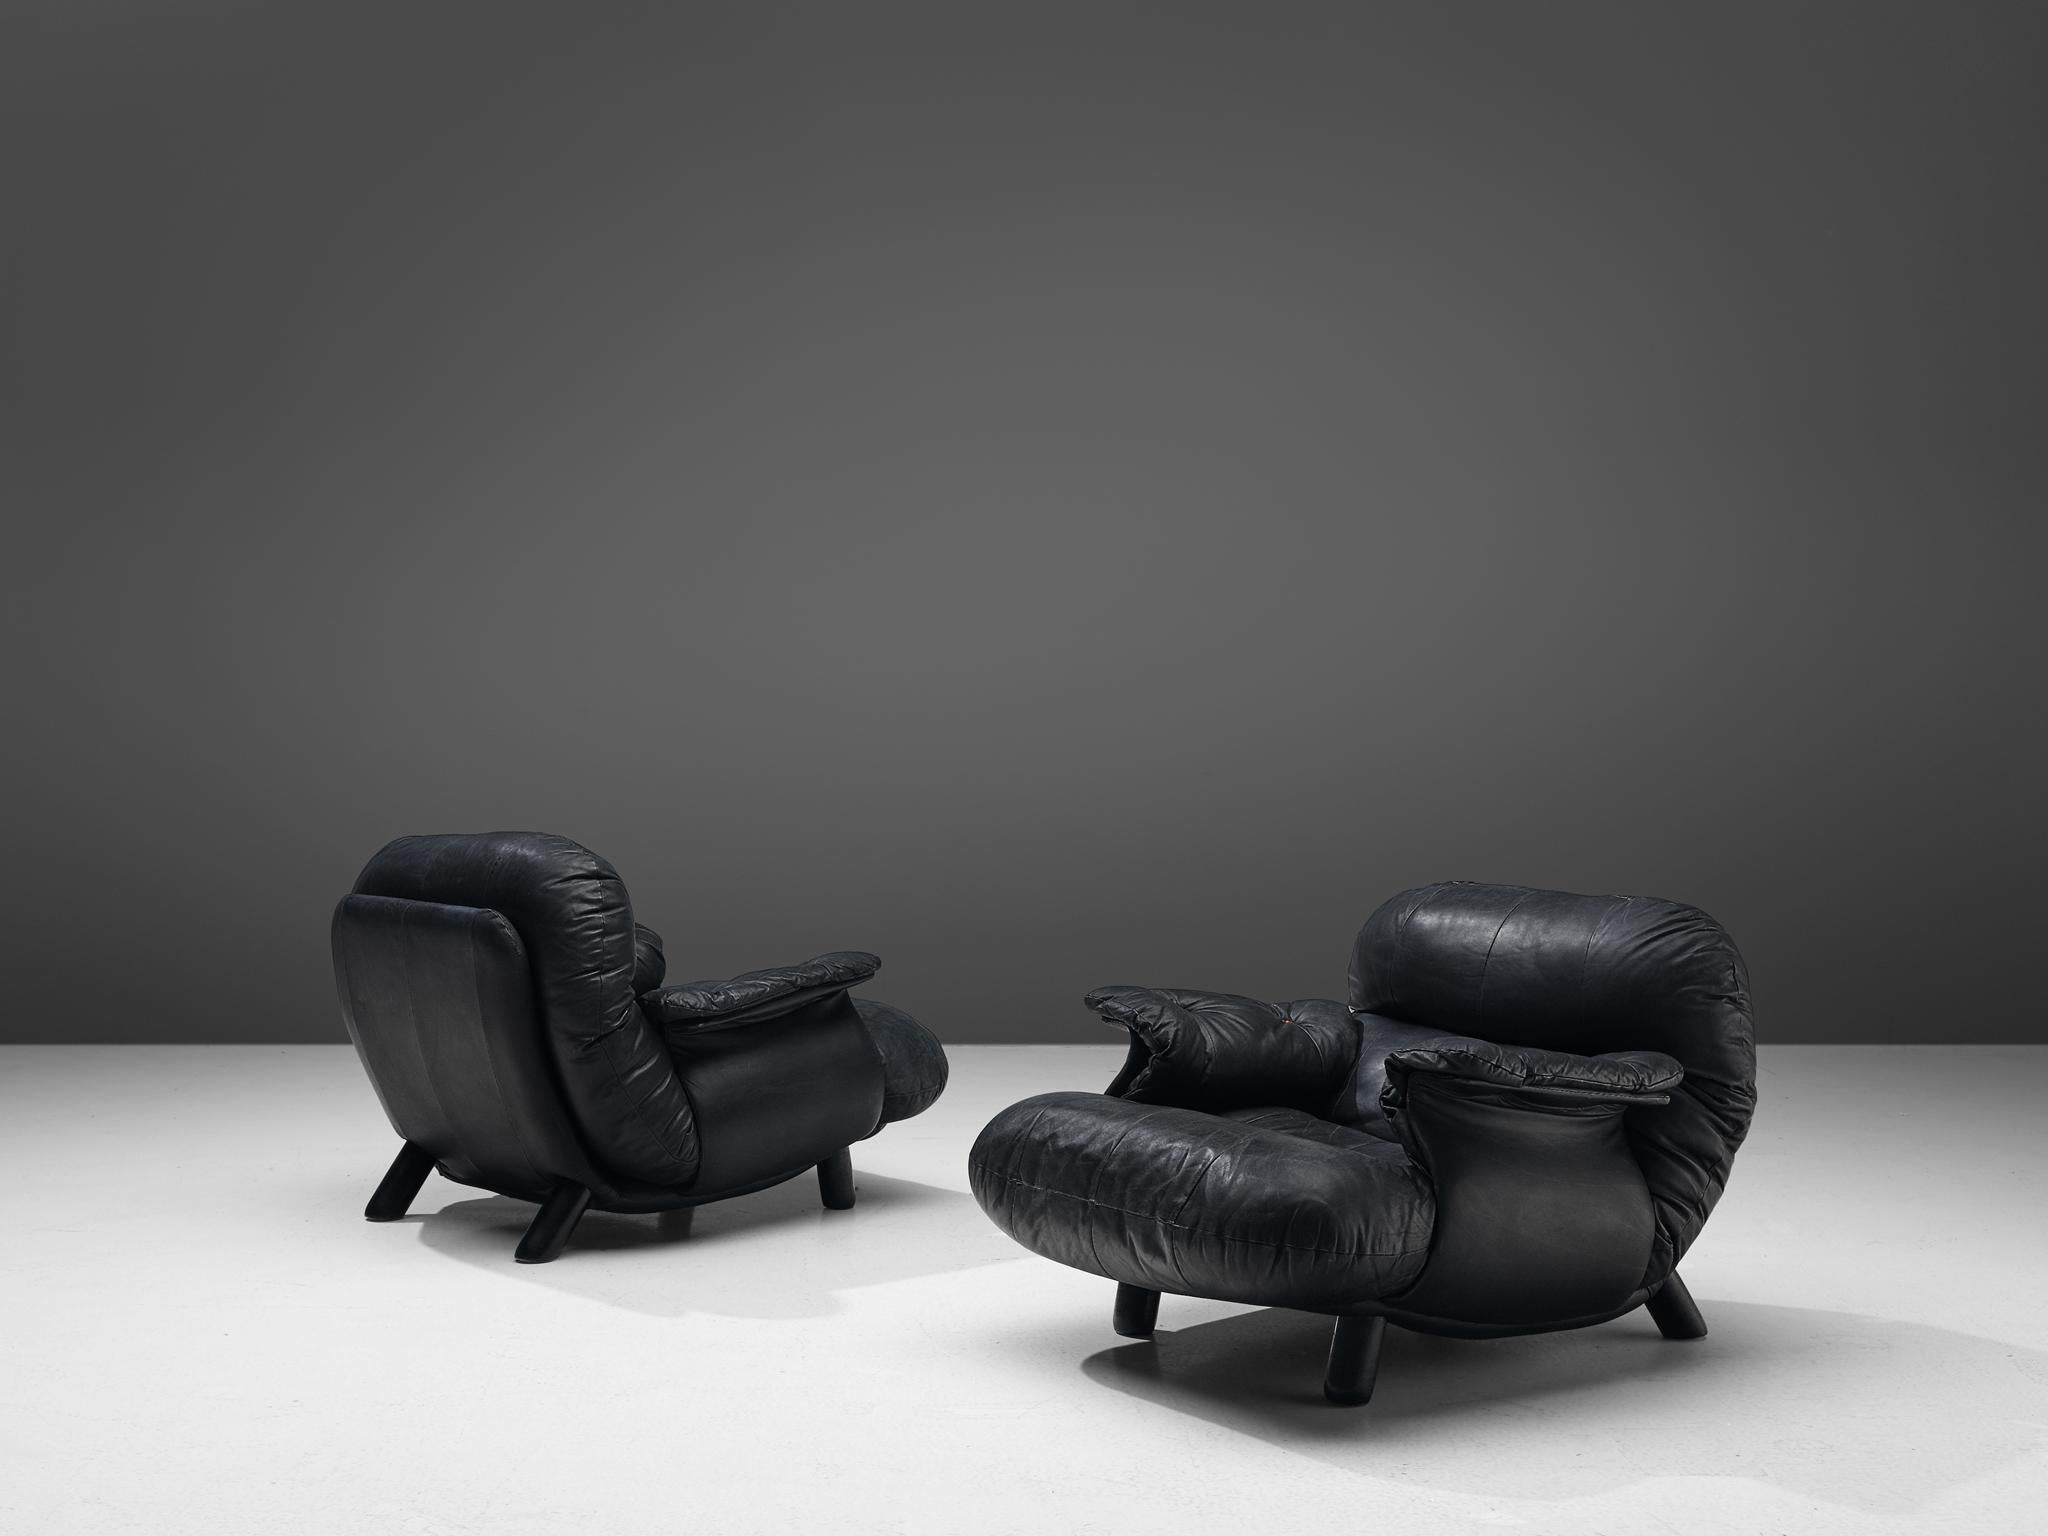 E. Cobianchi for Insa, pair of lounge chairs, leather and wood, Italy, 1970s

An Italian set of two bulky lounge chairs designed by E. Cobianchi. The lounge chairs feature thick, tufted seats and backrests. The armrests are curved in an extravagant